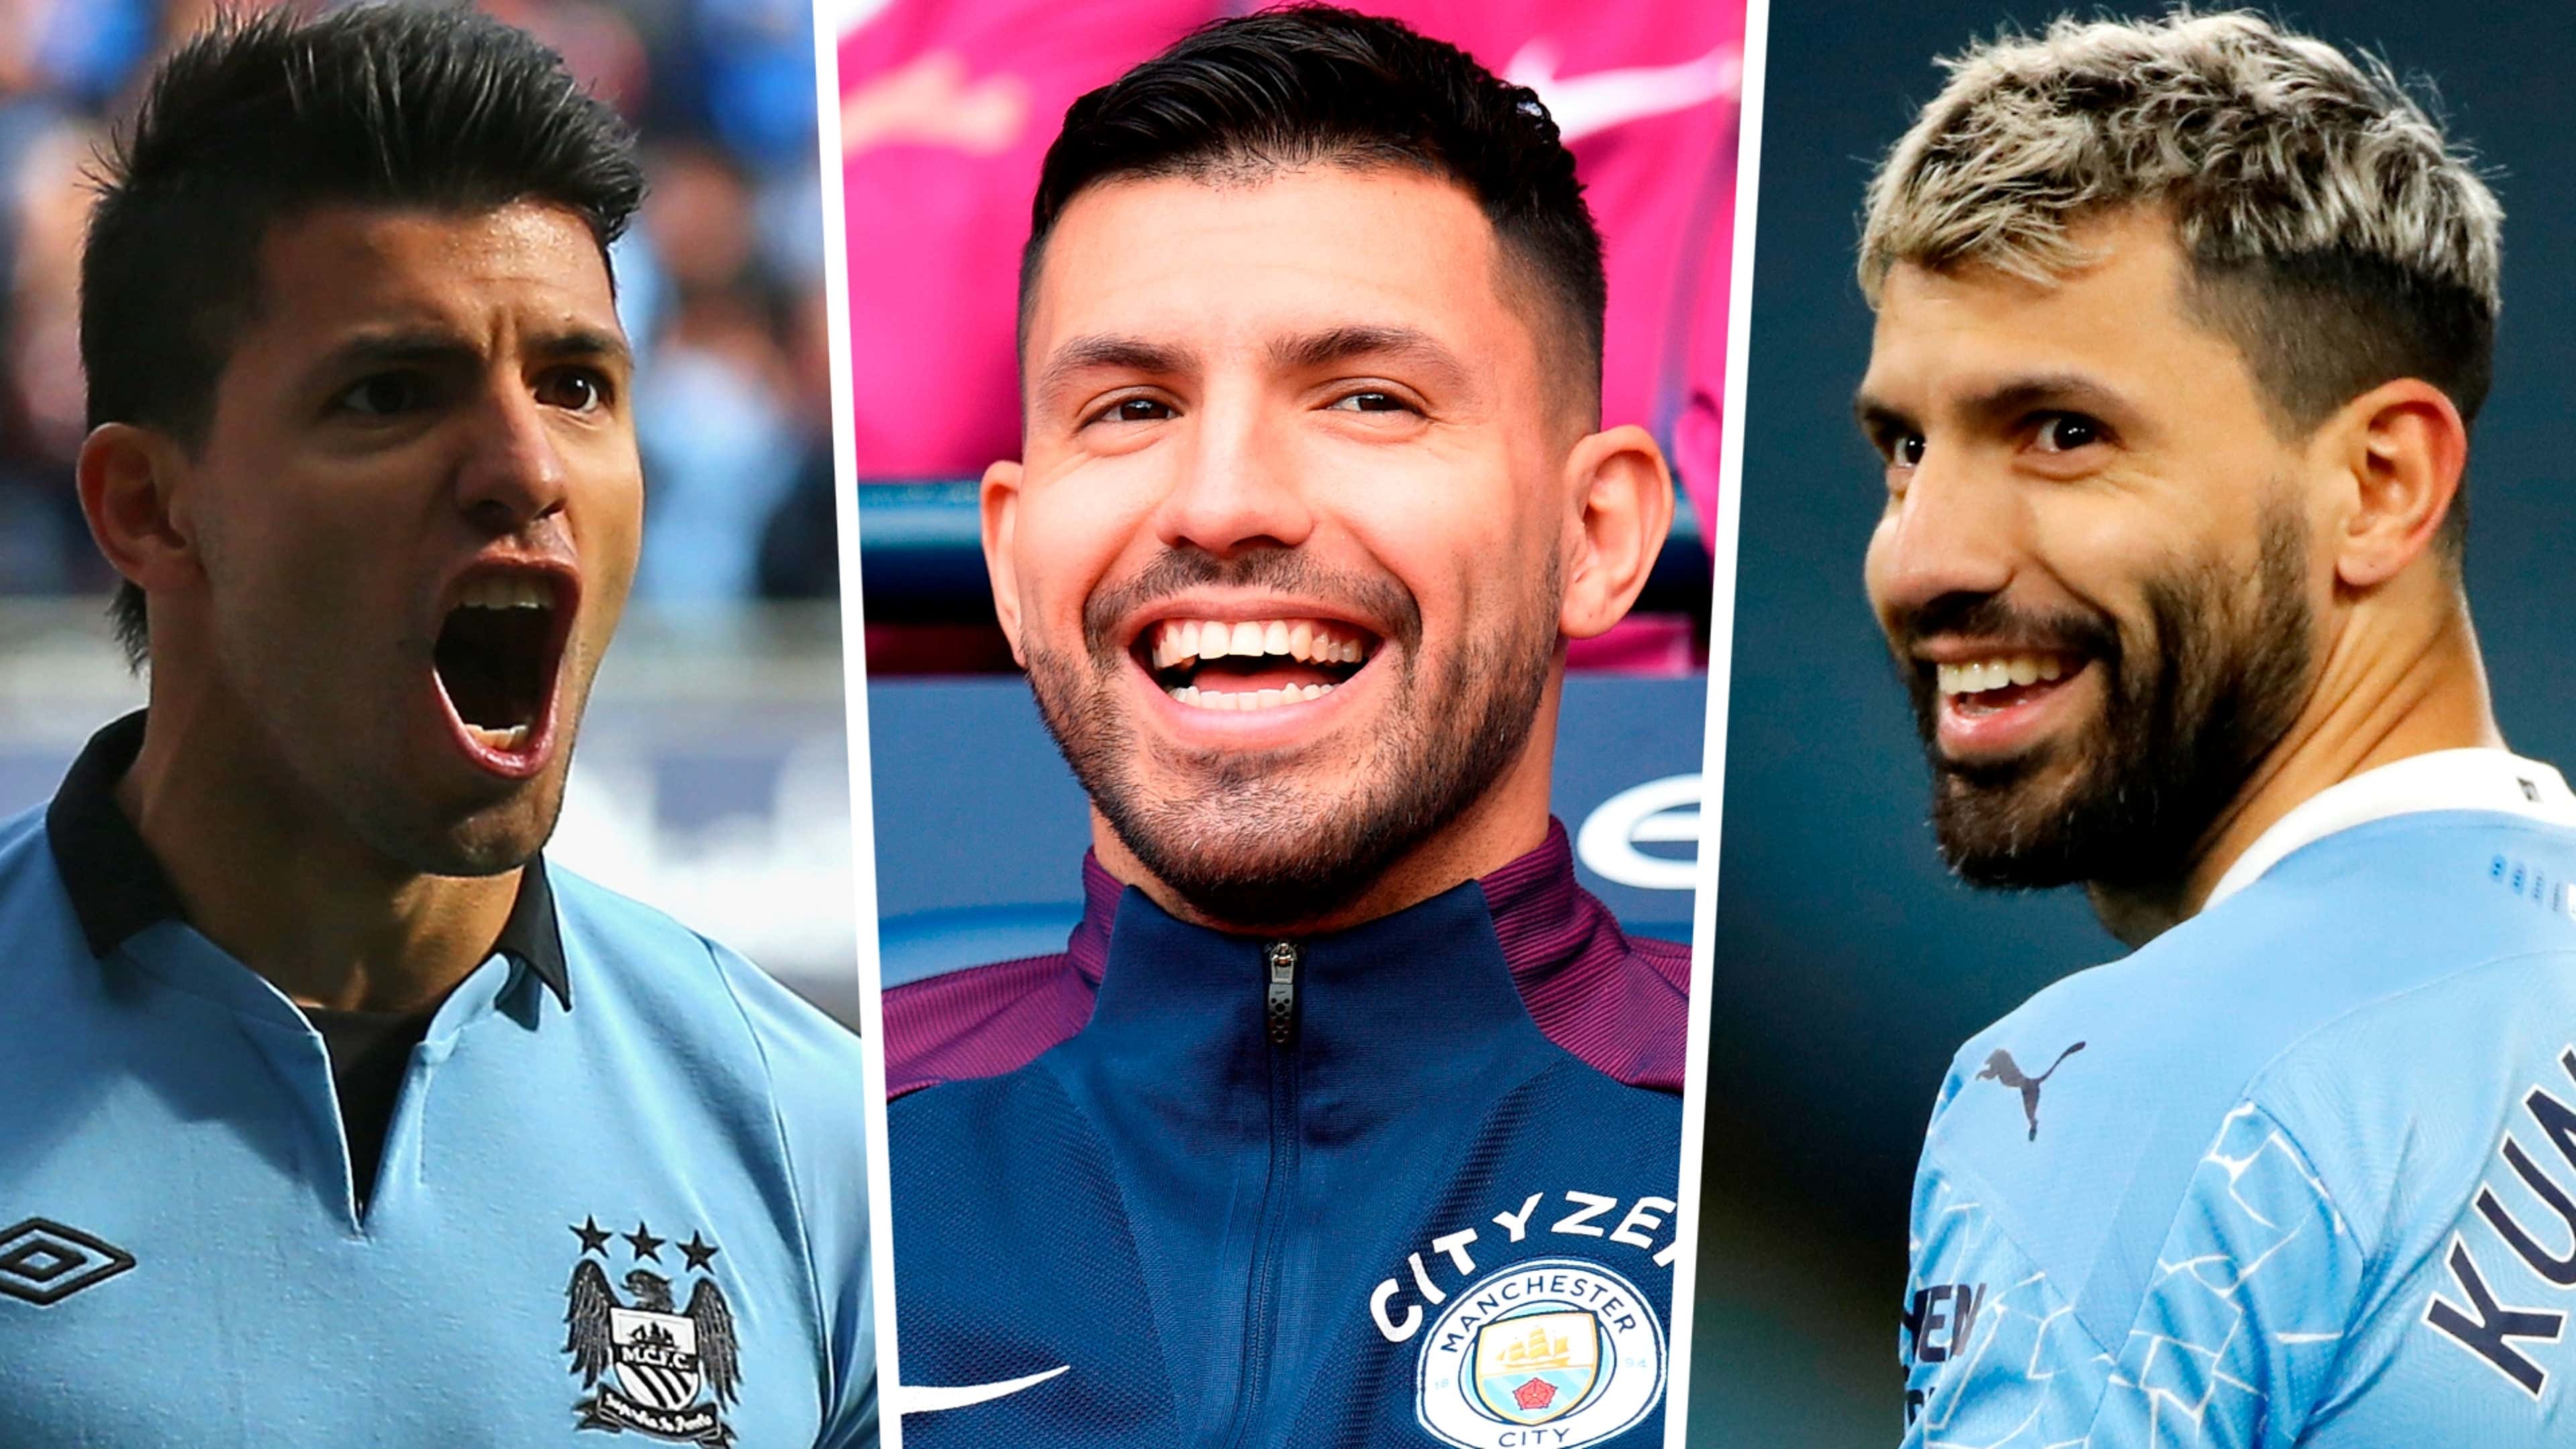 Man City 2021/22 home kit with Aguero tribute